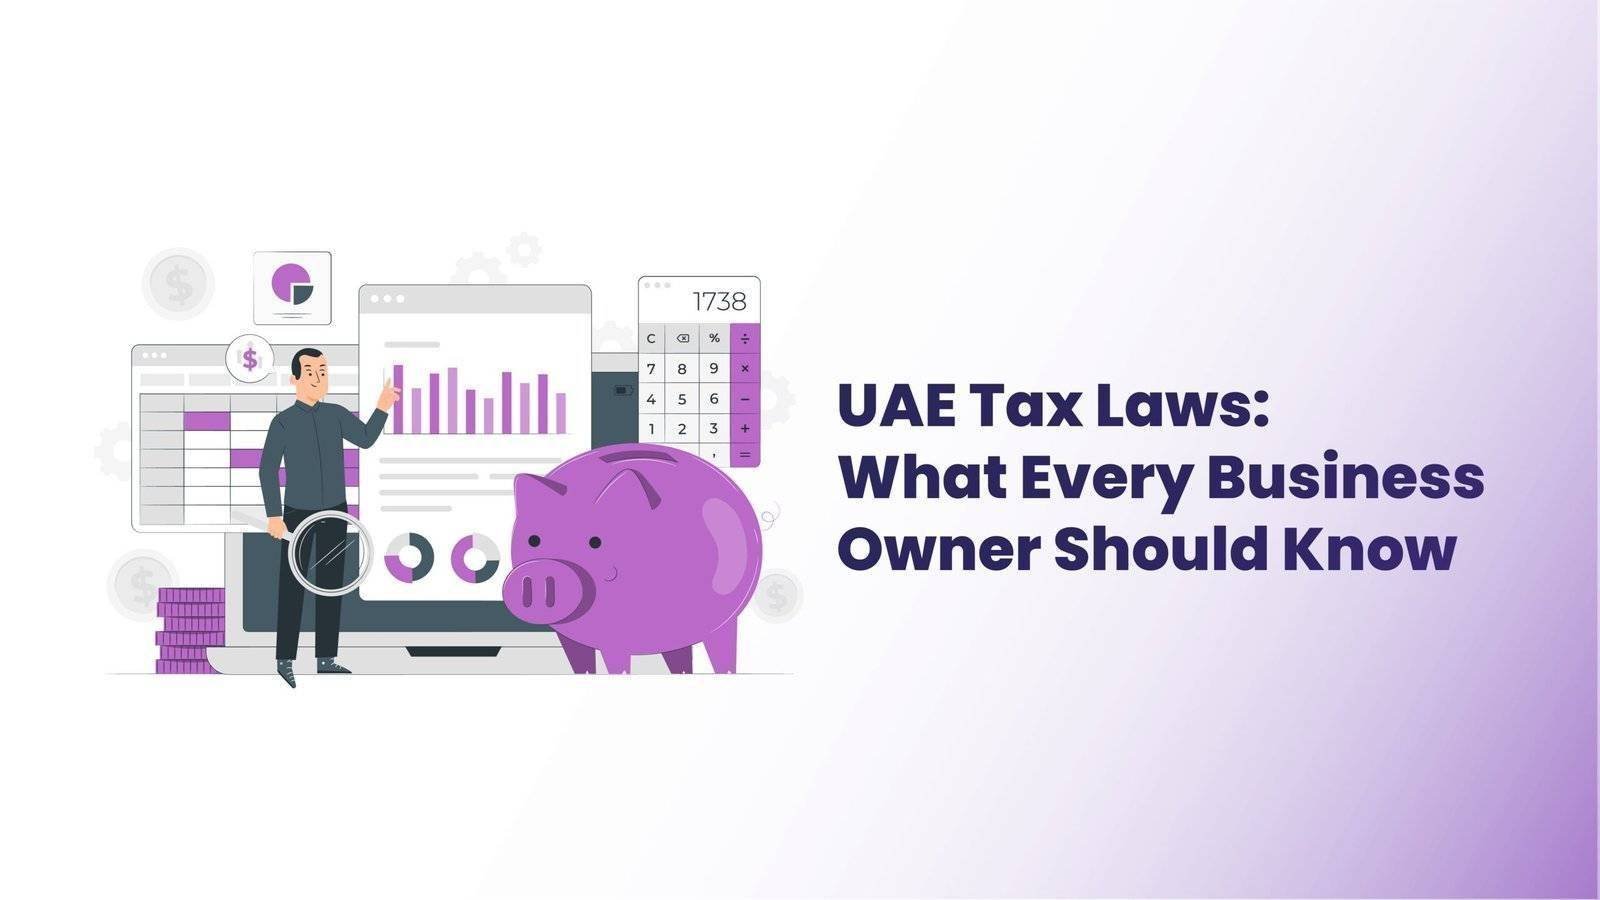 UAE Tax Laws: What Every Business Owner Should Know